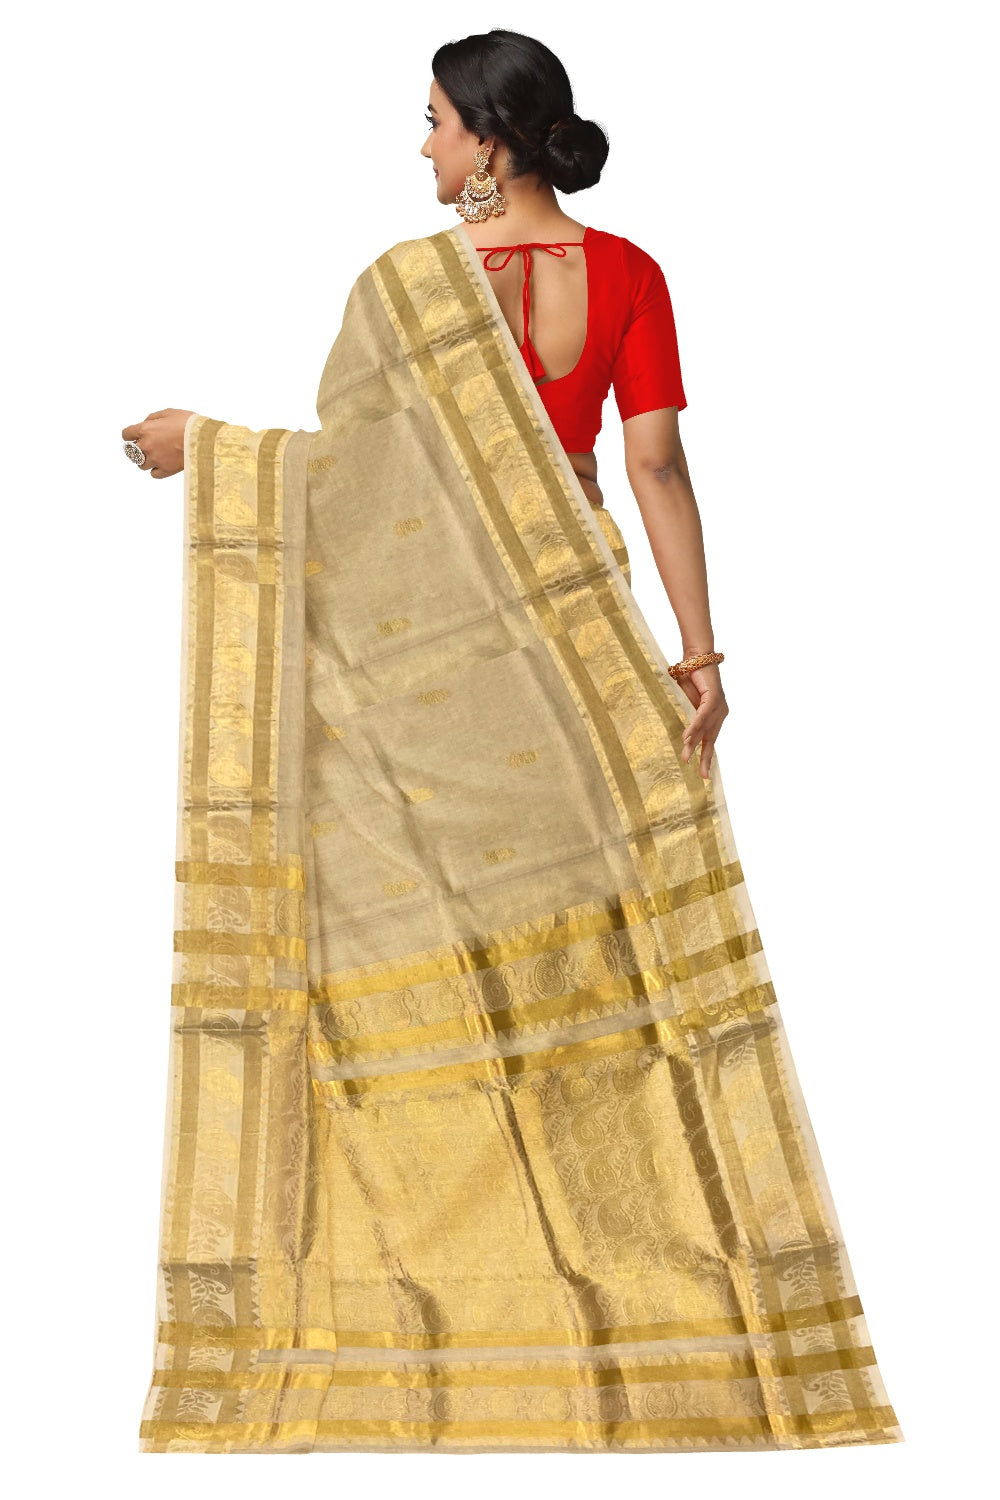 Southloom Premium Tissue Handloom Saree with Paisley Heavy Woven Works